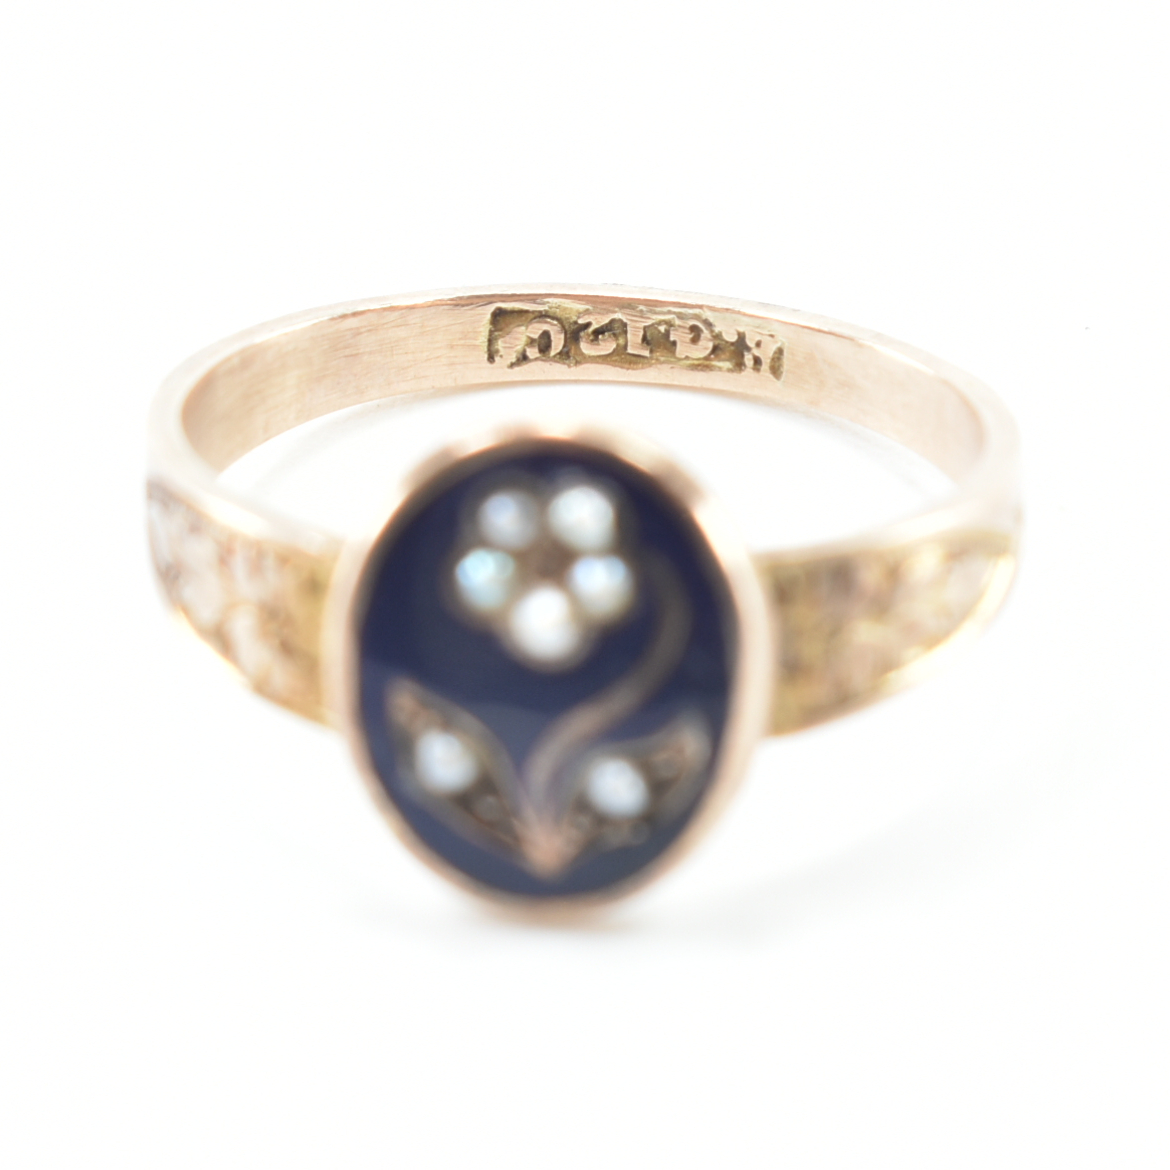 VICTORIAN 12CT GOLD ENAMEL PEARL FORGET-ME-NOT RING - Image 7 of 8